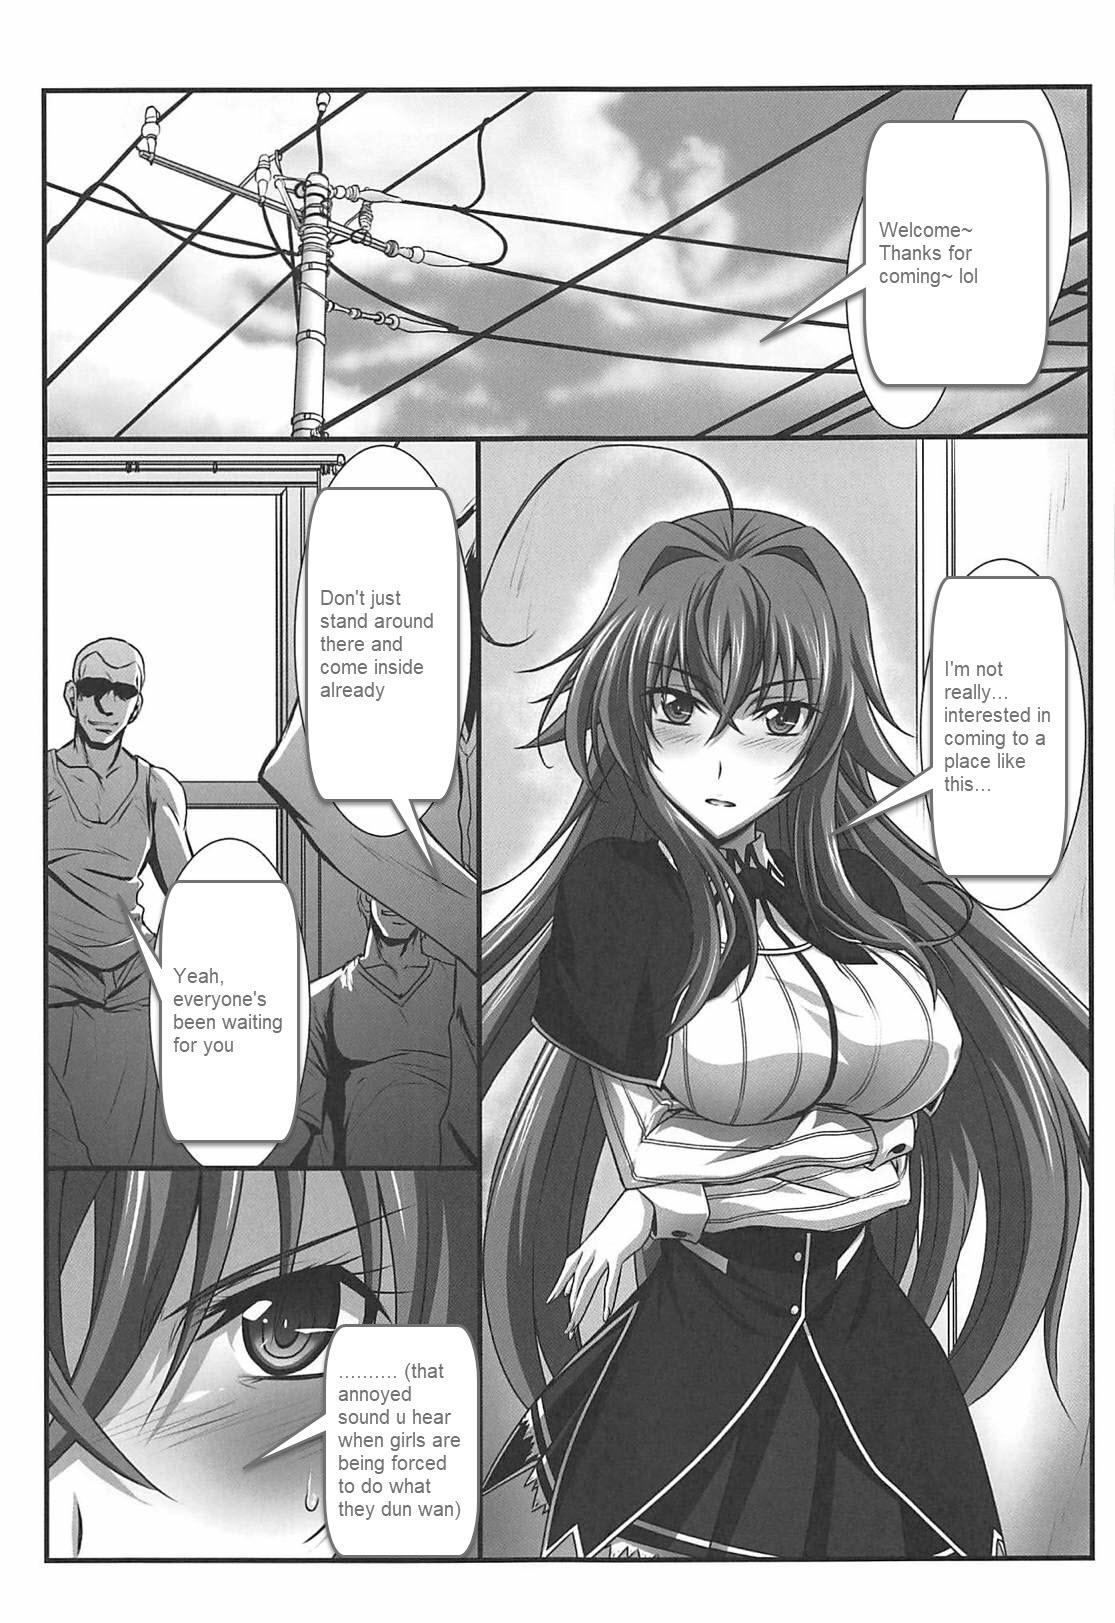 Office Fuck SPIRAL ZONE DxD II - Highschool dxd Pervs - Page 4